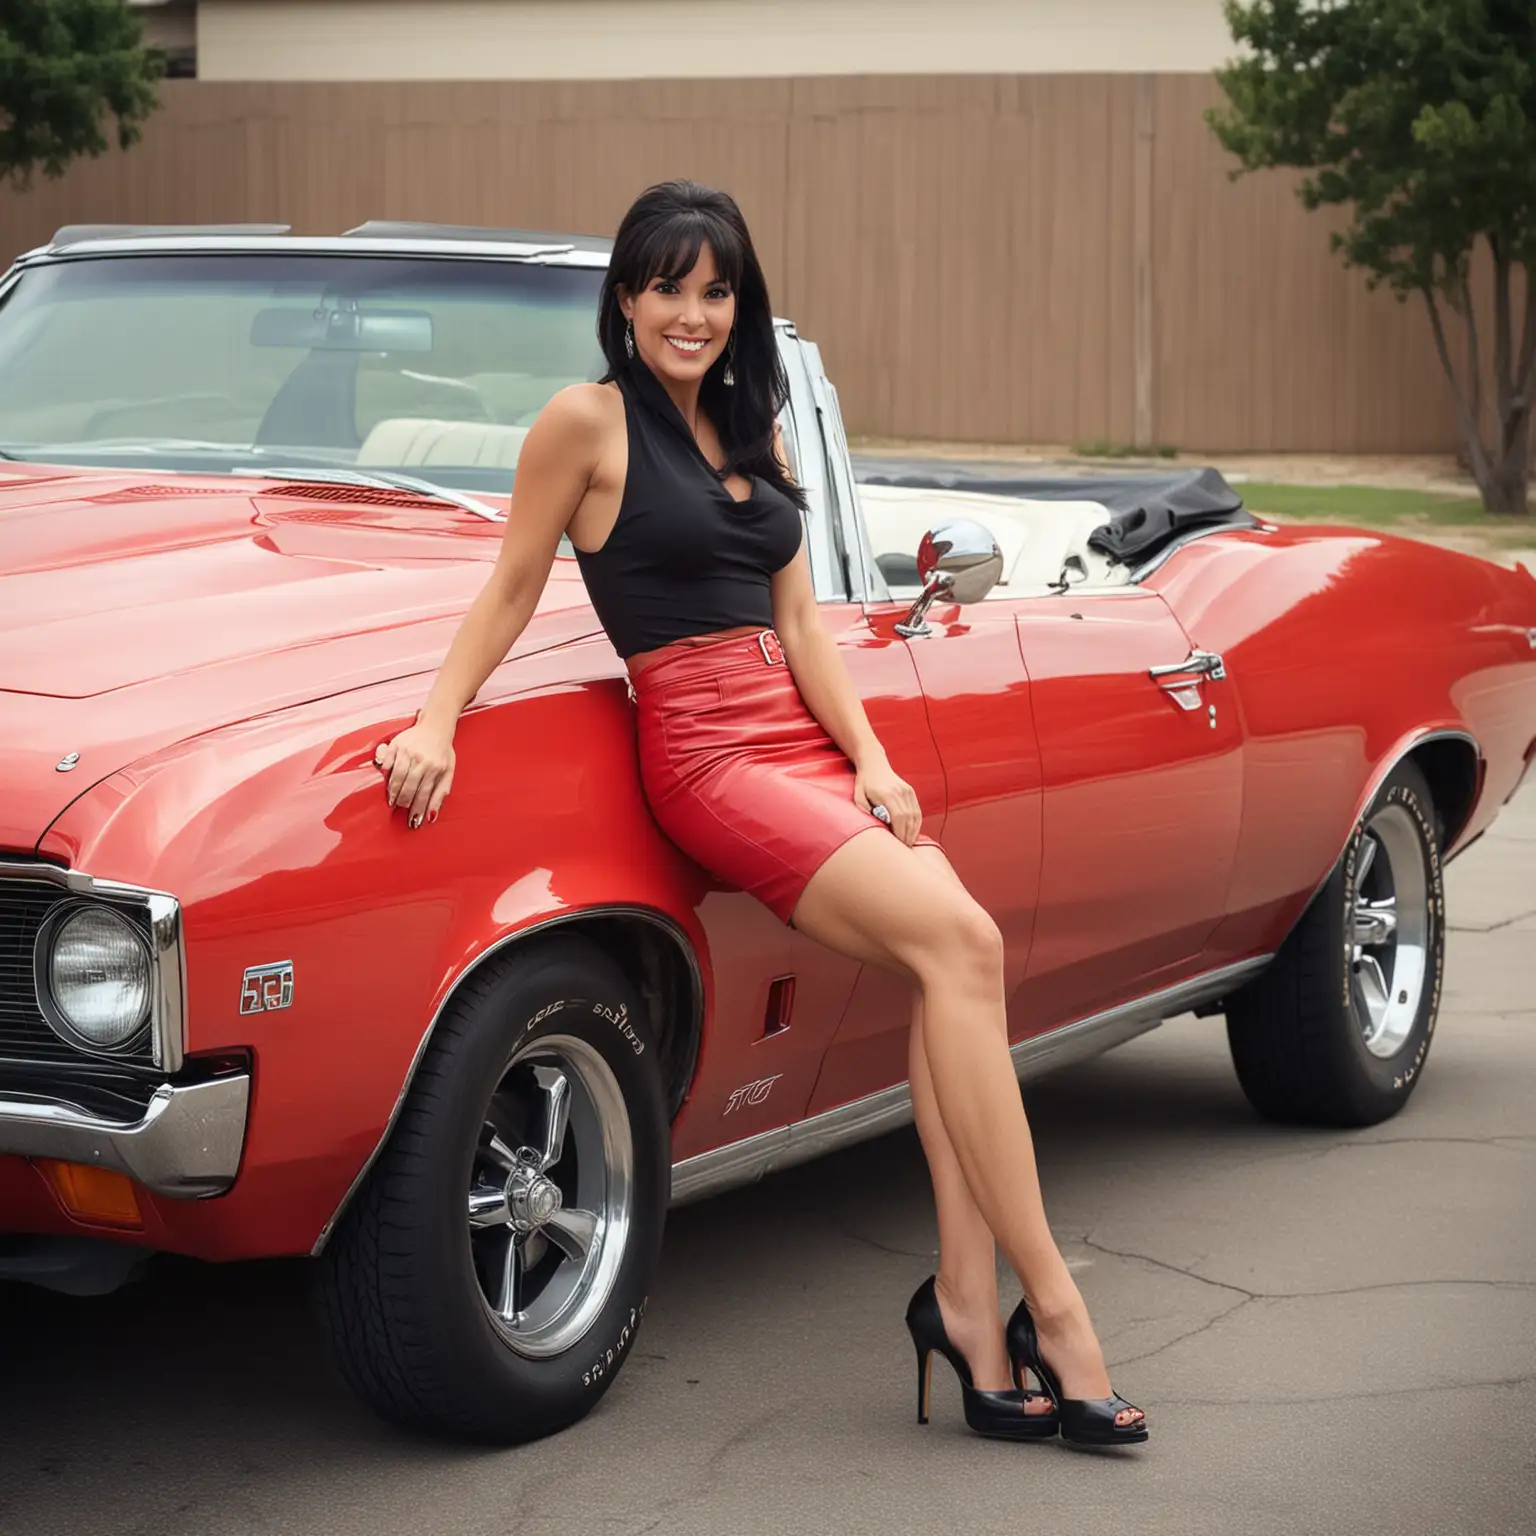 Smiling-Woman-in-Red-Leather-Skirt-Sitting-on-1969-Pontiac-GTO